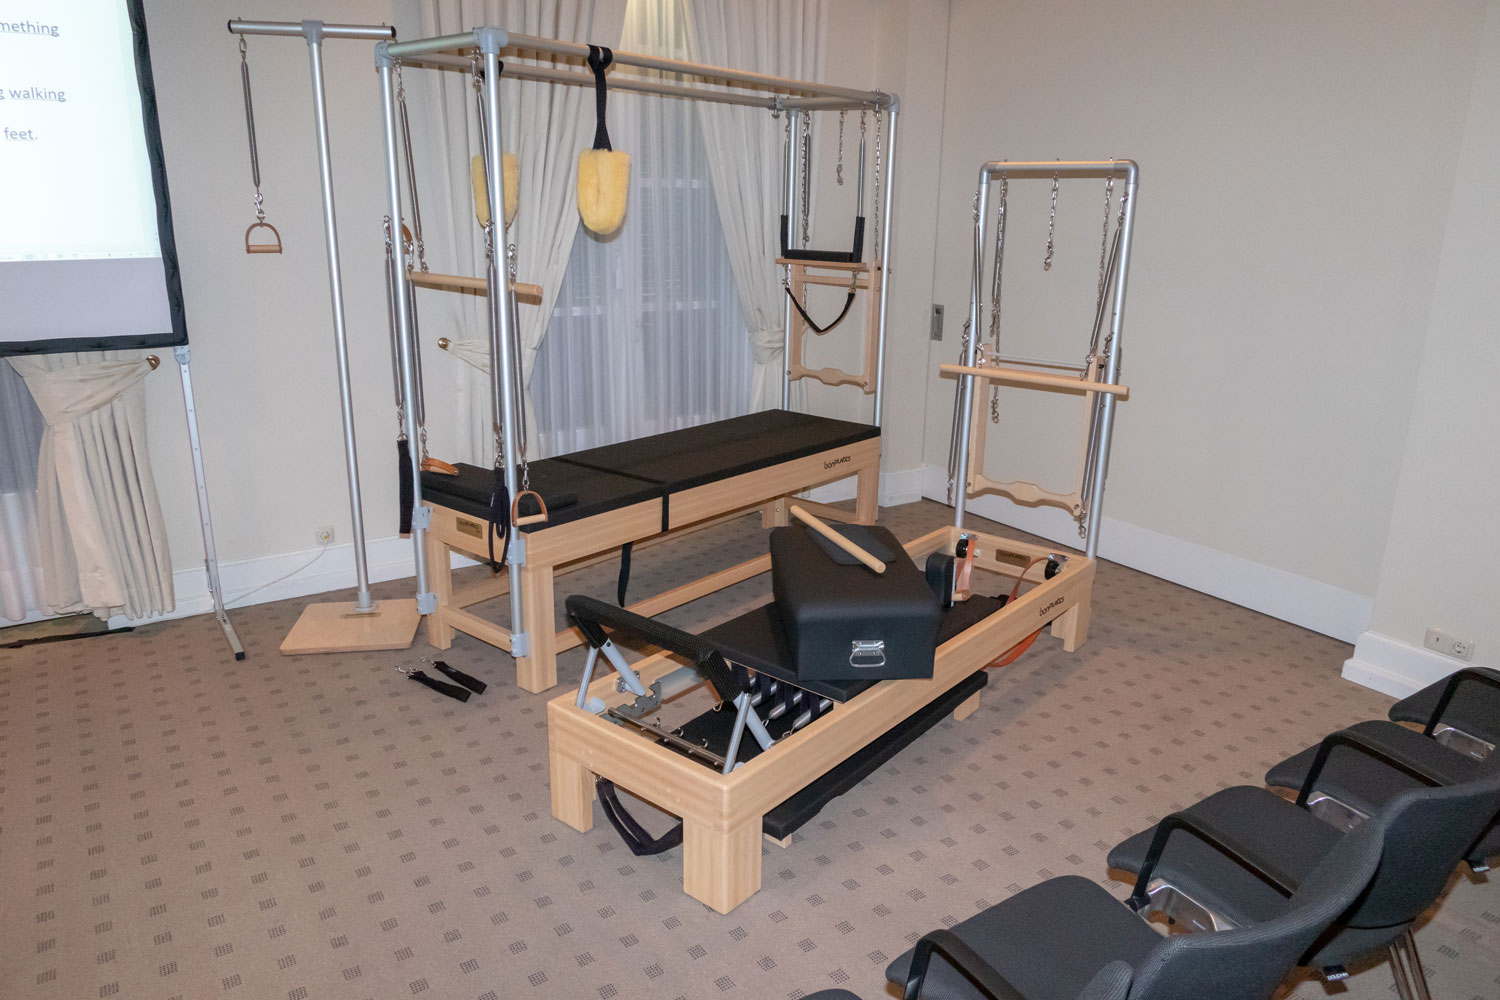 The studio suite with many Pilates devices.